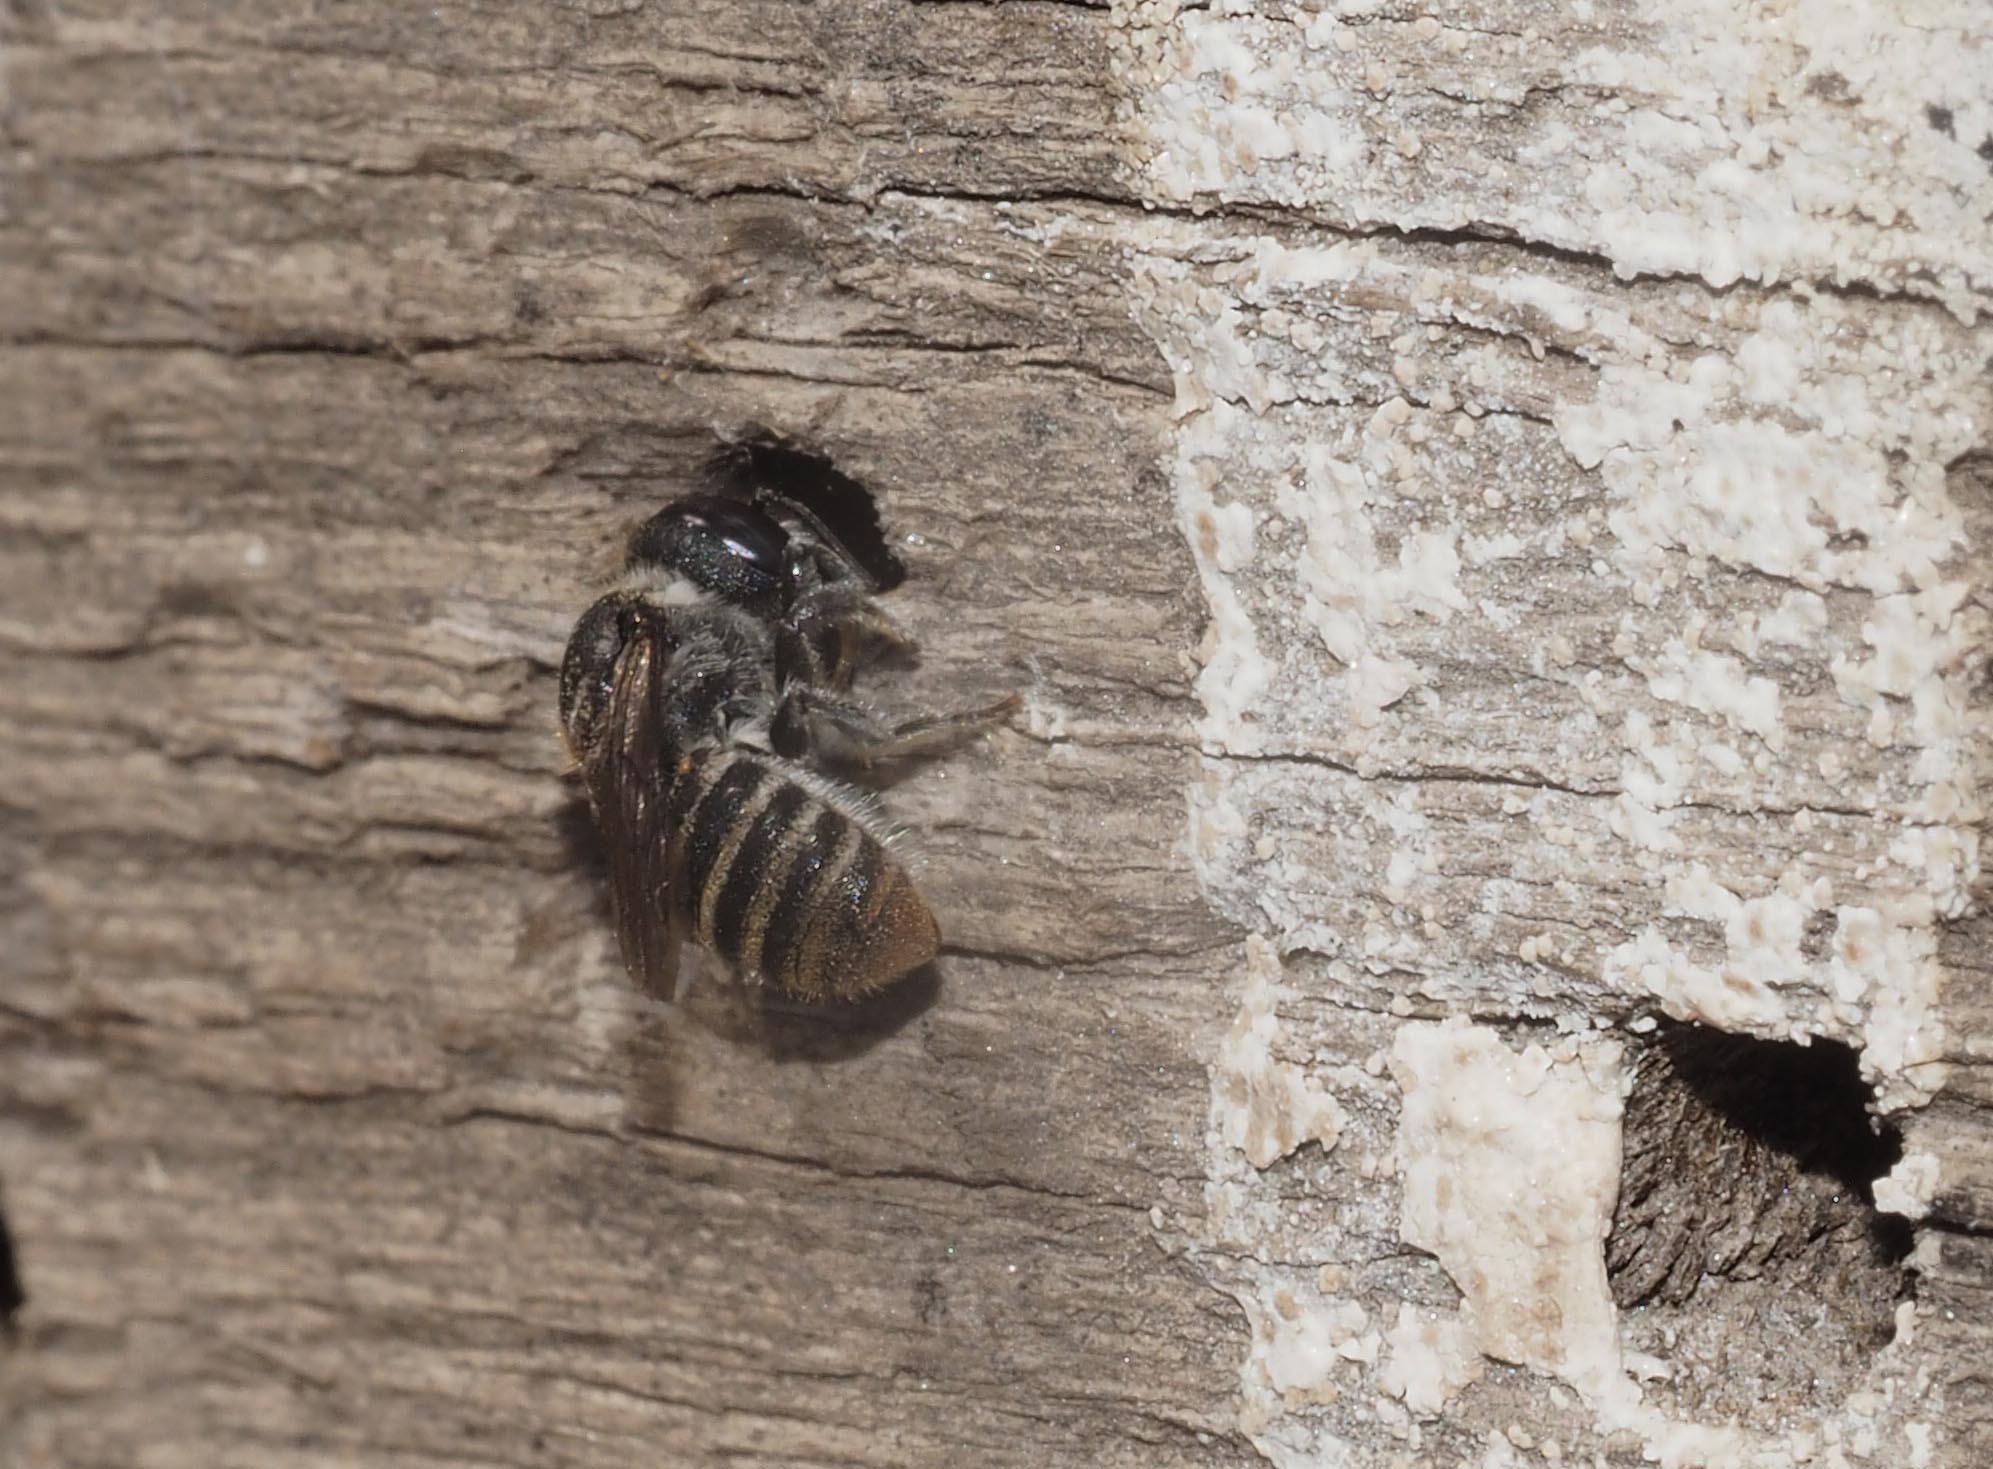 11 - Jan 2017 - A resin bee entering and sealing a hole